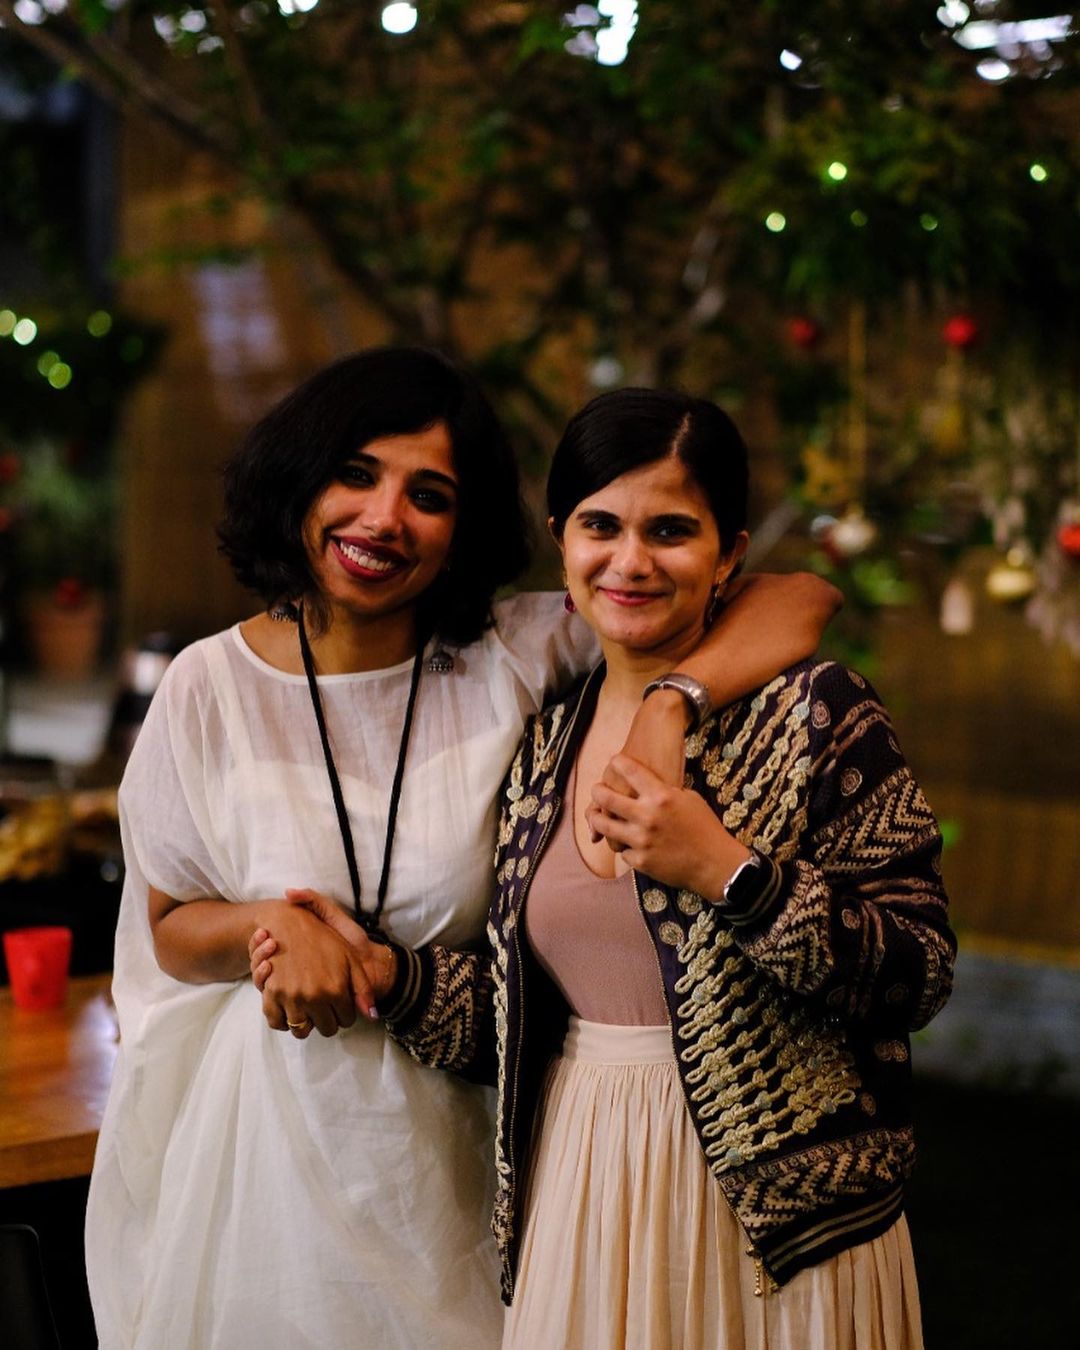 Anisha and Aysha, two food writers who have compiled A Kitchen of One's Own